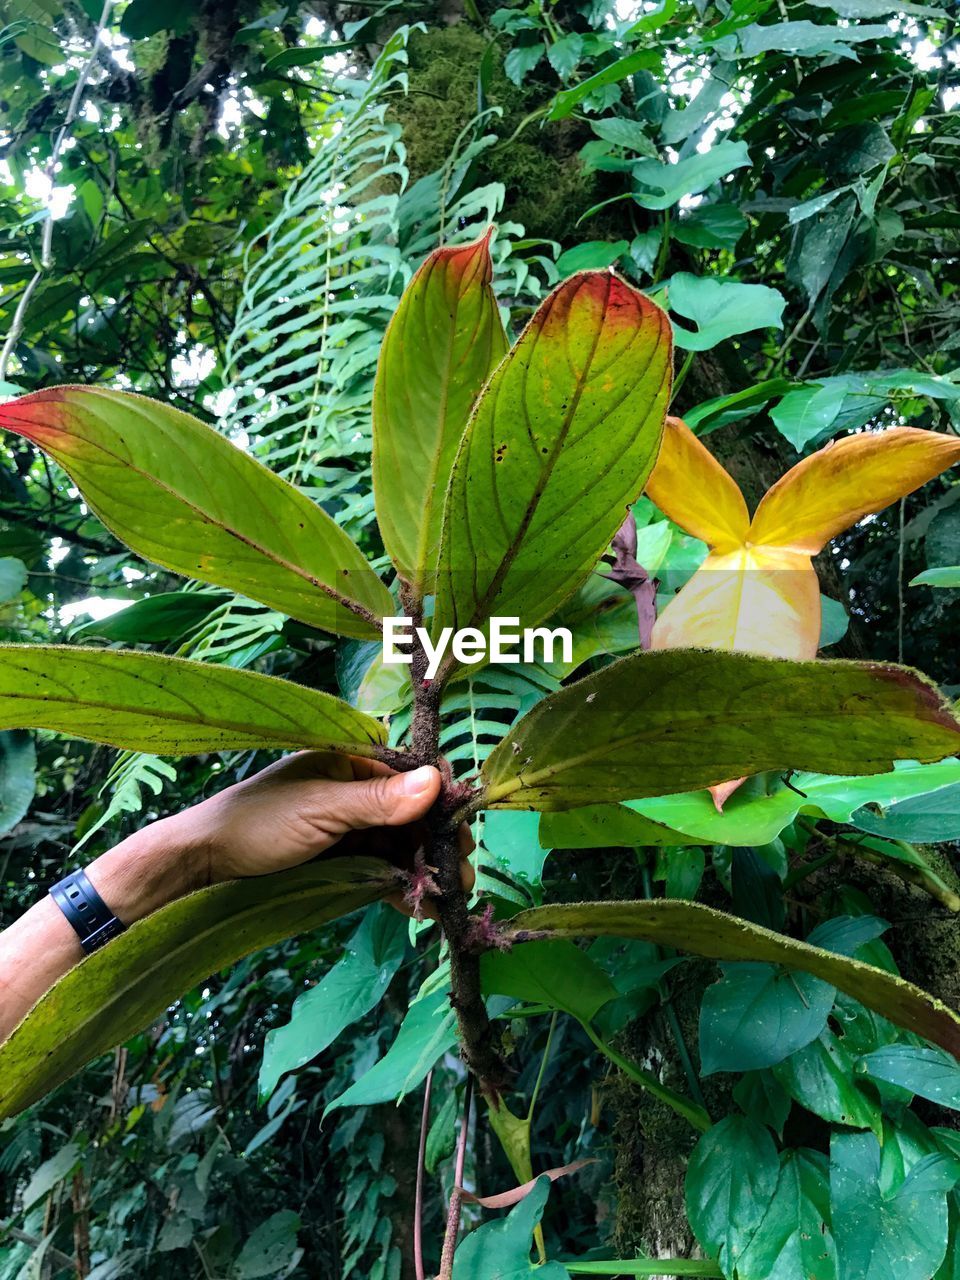 CLOSE-UP OF BANANA TREE AGAINST PLANTS